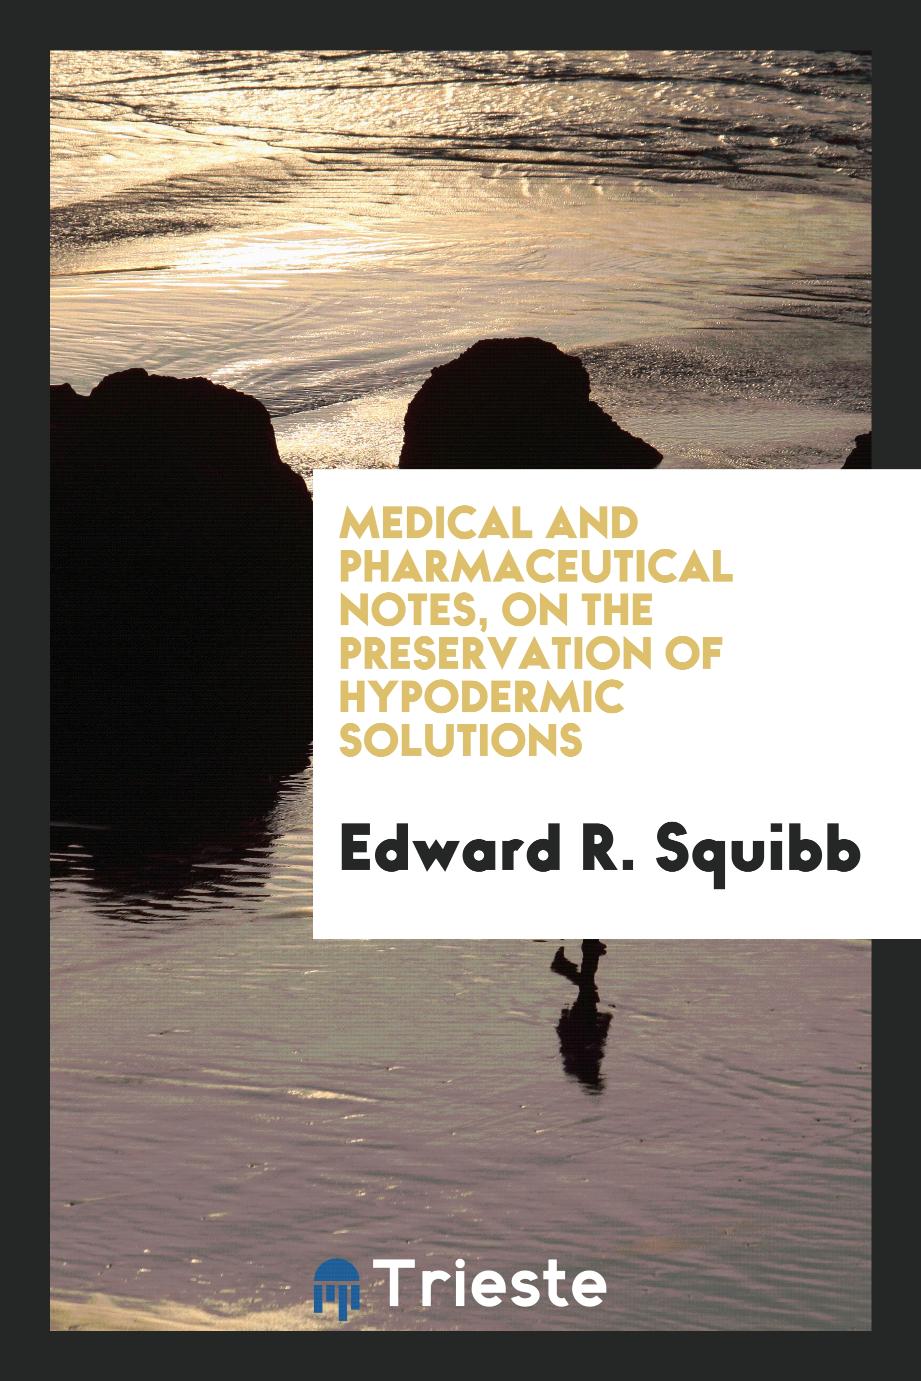 Medical and pharmaceutical notes, on the preservation of hypodermic solutions